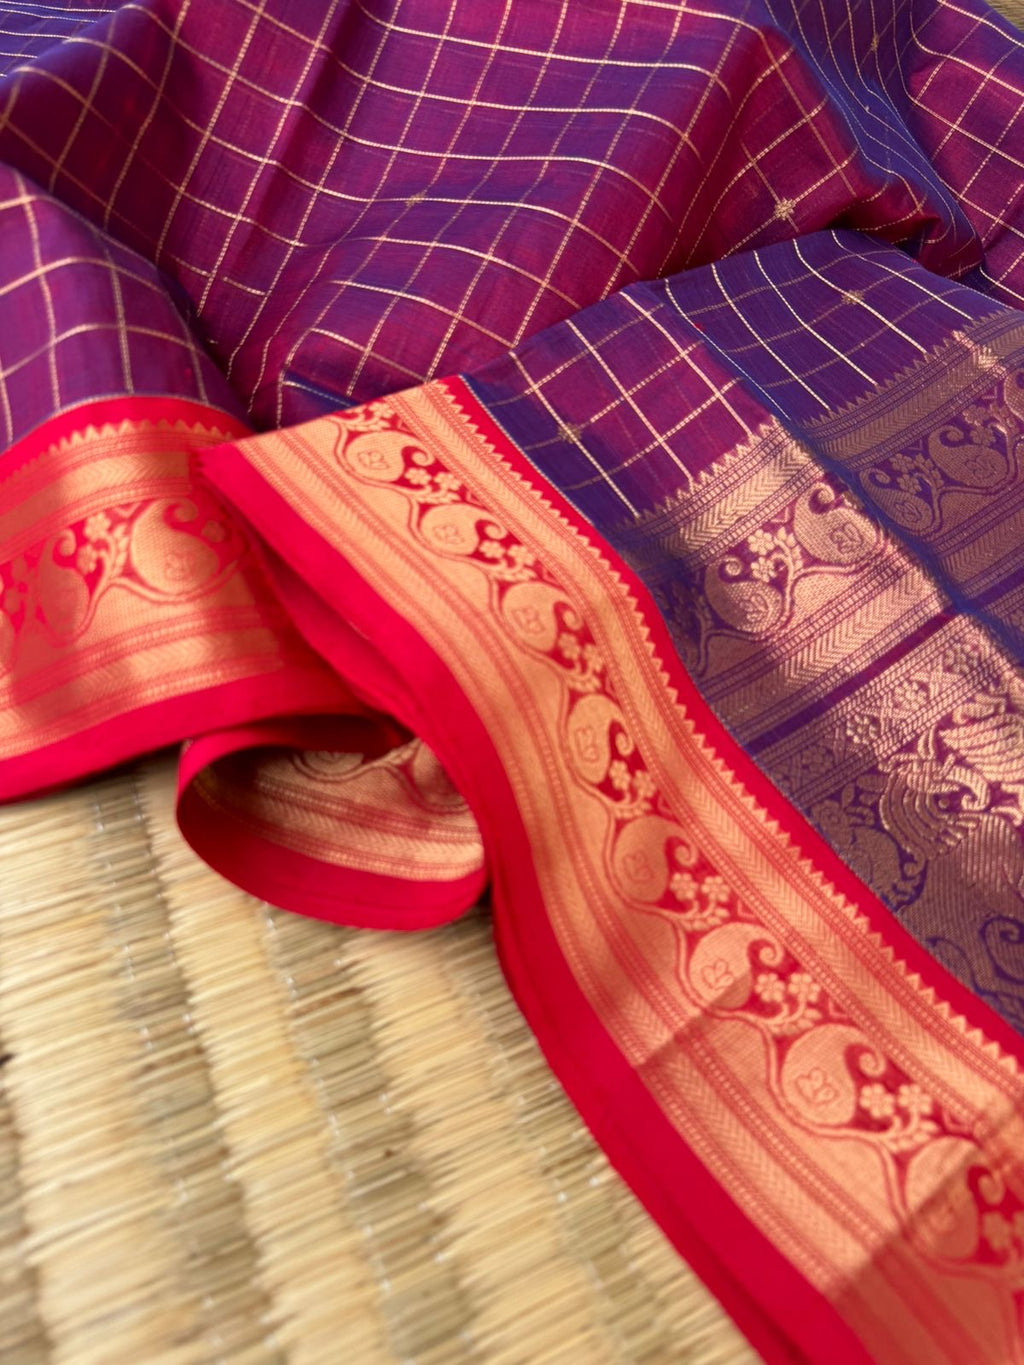 Zari Kissed Silk Cotton - red short violet purple with muthukattam body and paisley woven borders